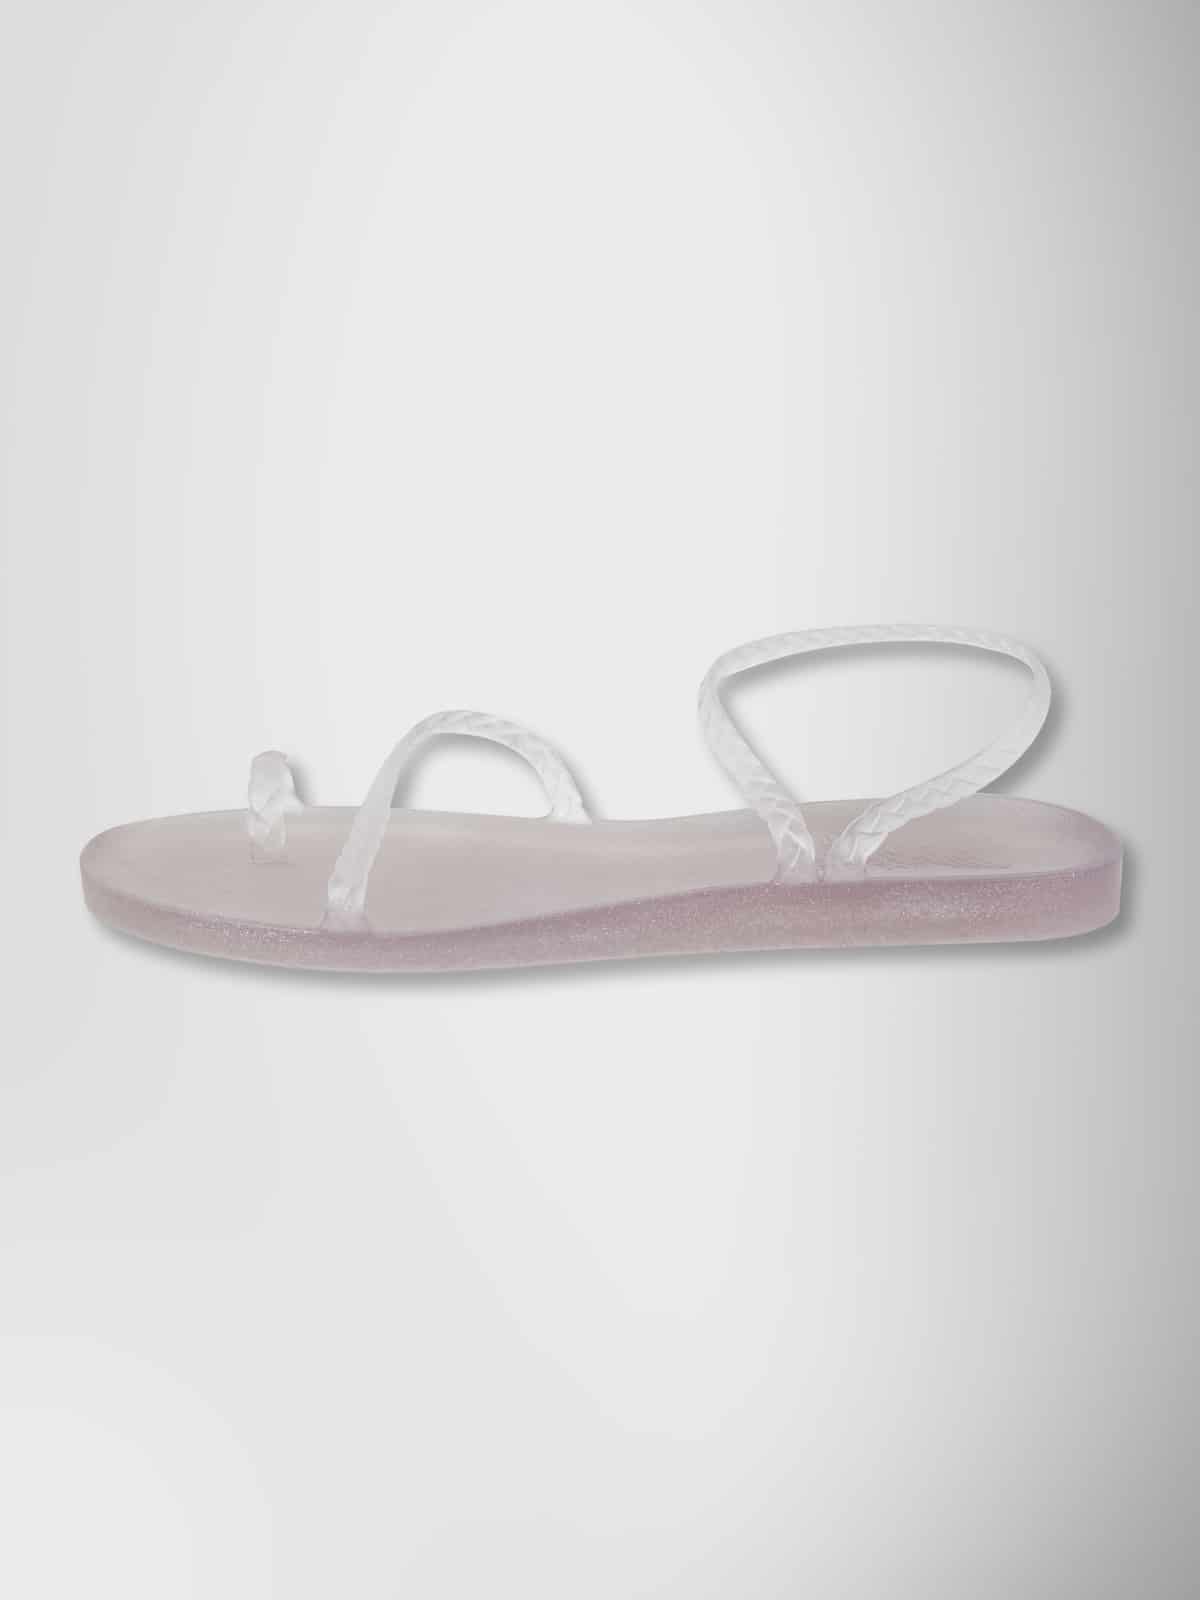 SANDALS "ELEFTHERIA" WITH GLITTERY RUBBER MATERIAL